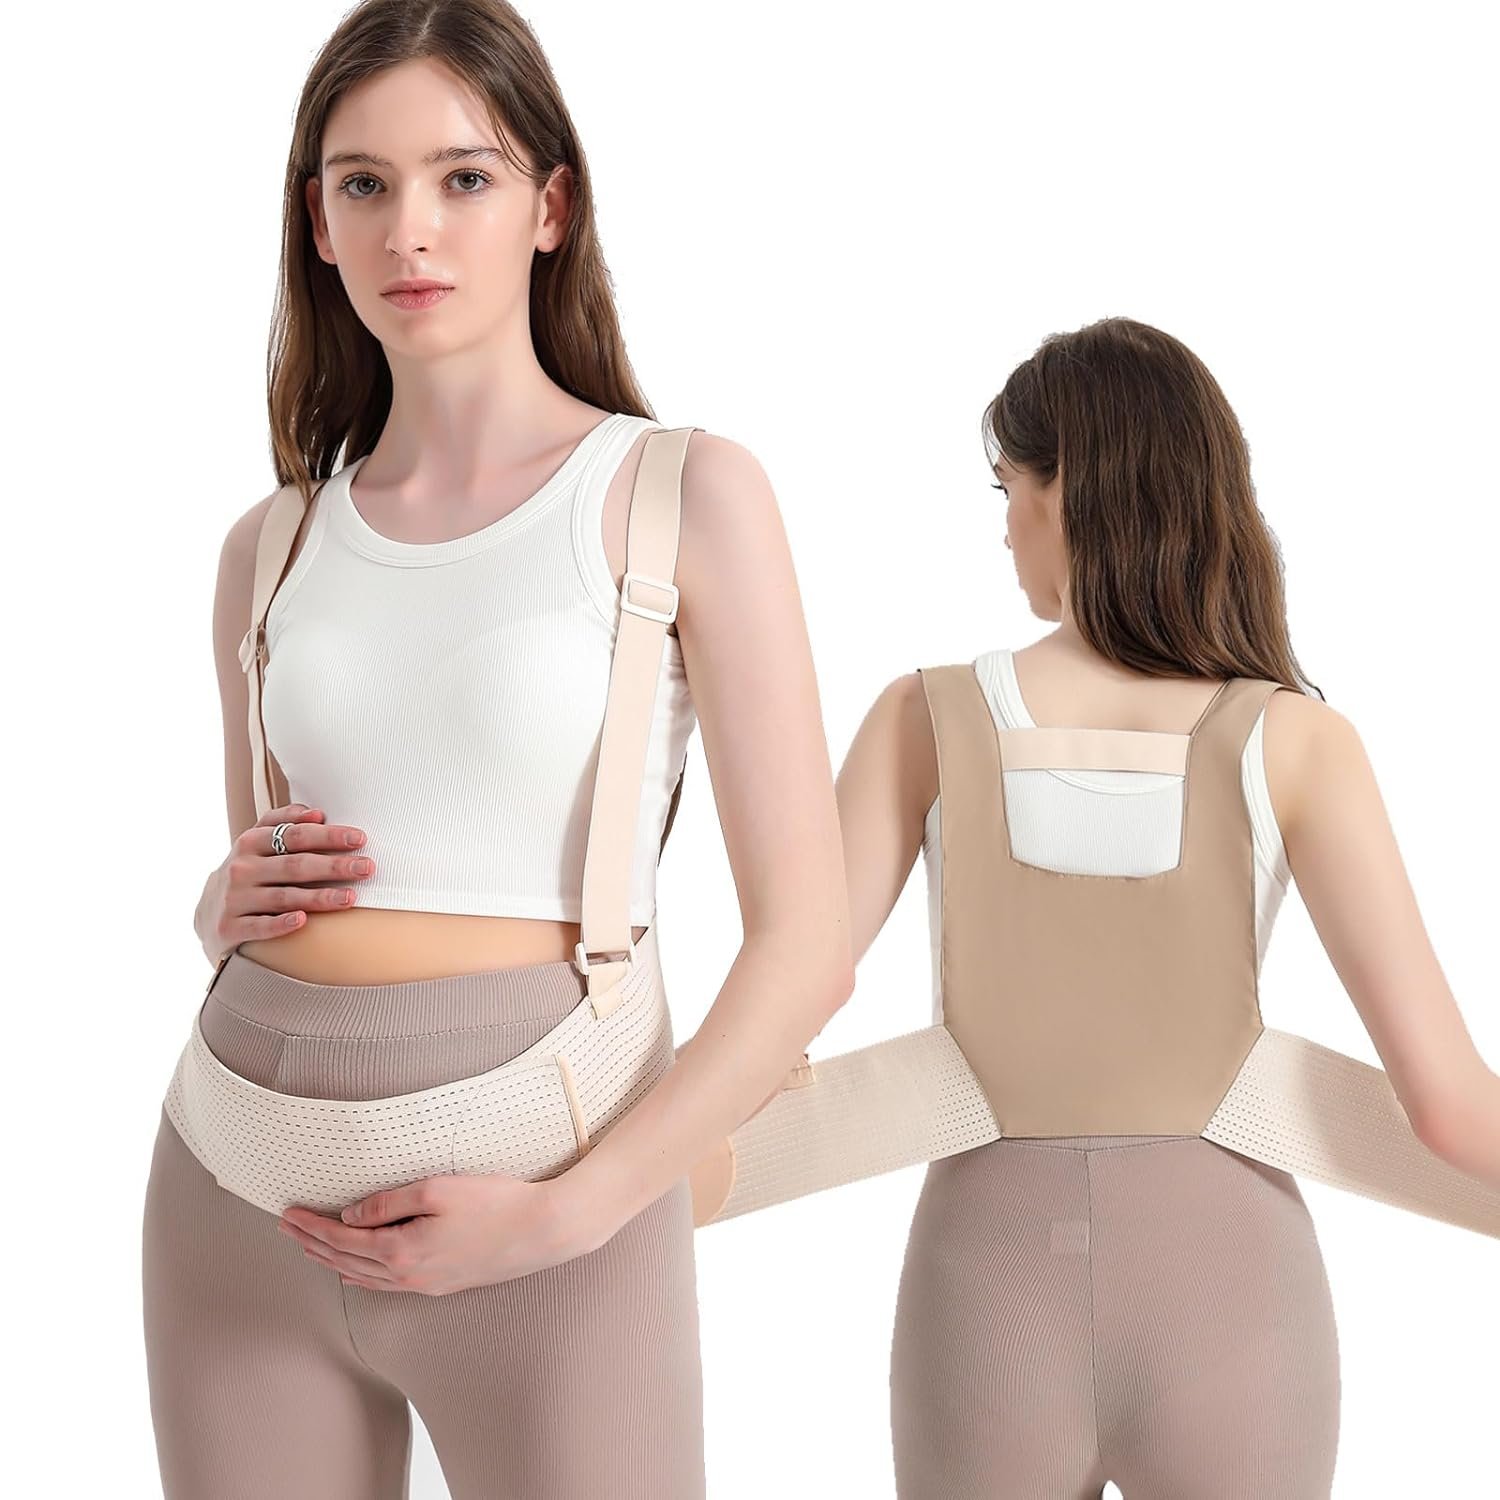 taynoes Maternity Belly Band Pregnancy Support for Abdomen, Pelvic, Waist, Back Pain,Breathable with Detachable Shoulder Strap, Adjustable Sizes，Pregnancy Must Haves Essentials (X-Large)